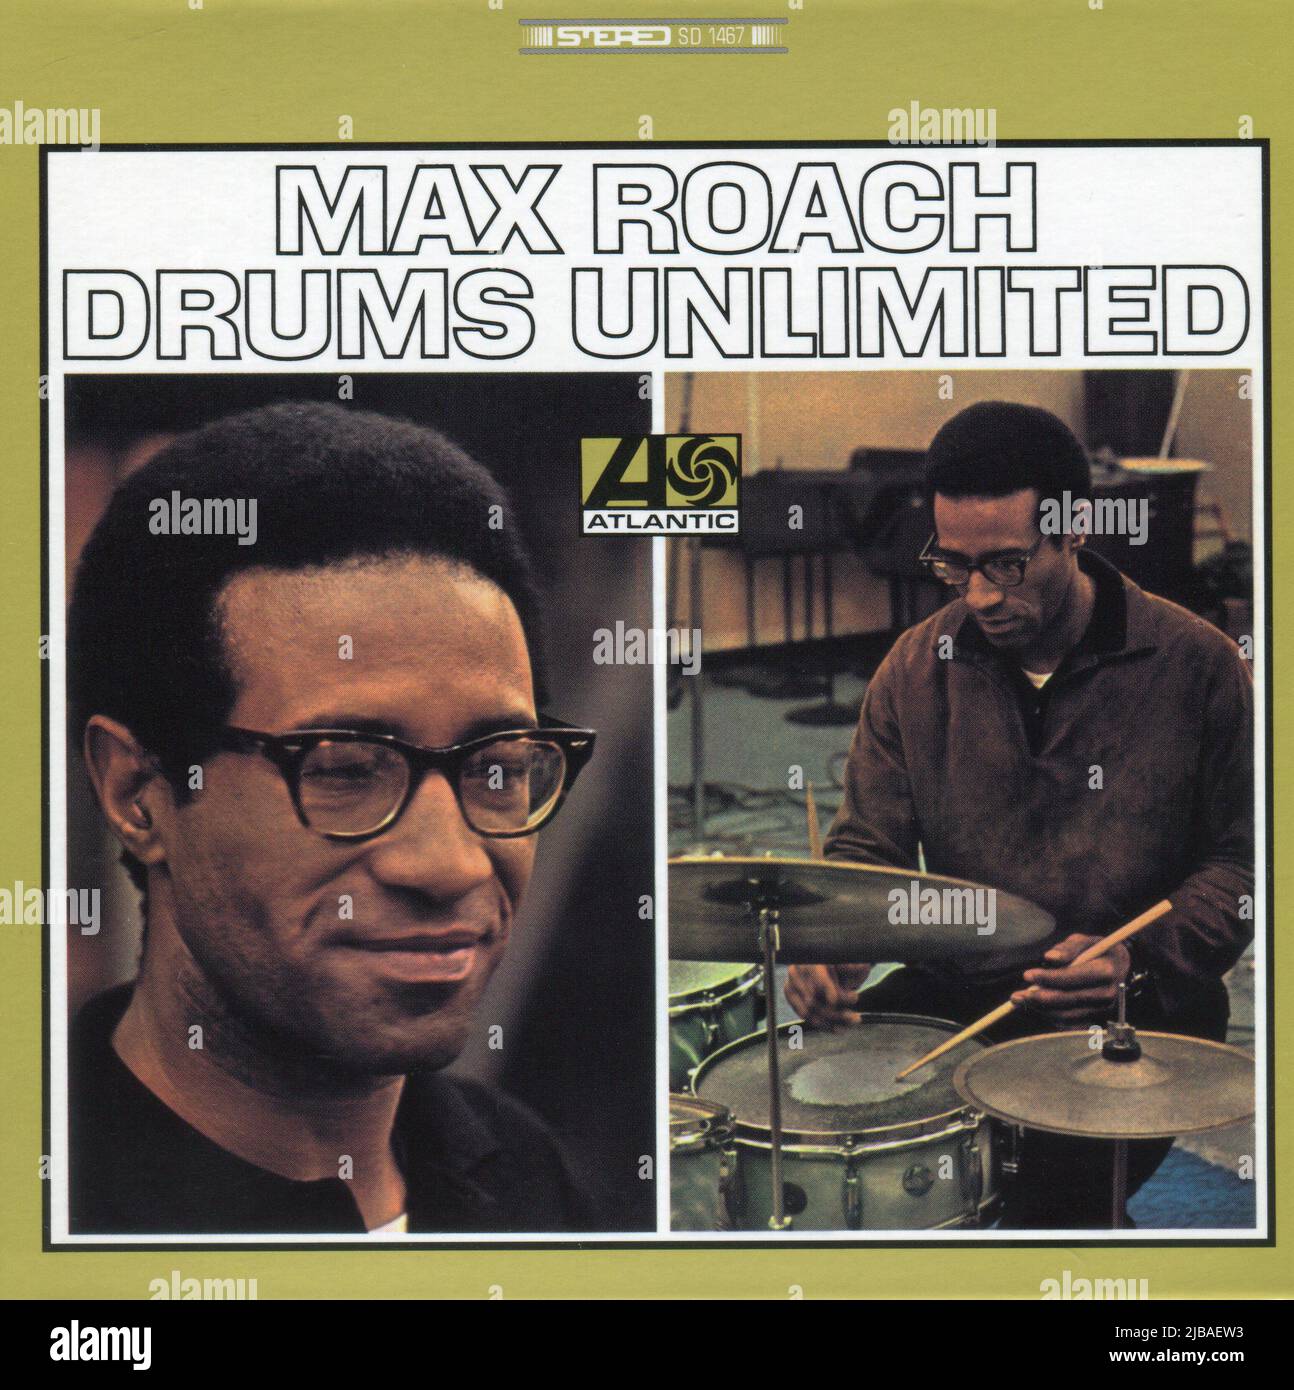 CD: Max Roach  DRUMS UNLIMITED (WPCR-25113) Promo, Released: 22 november 2006. Stock Photo